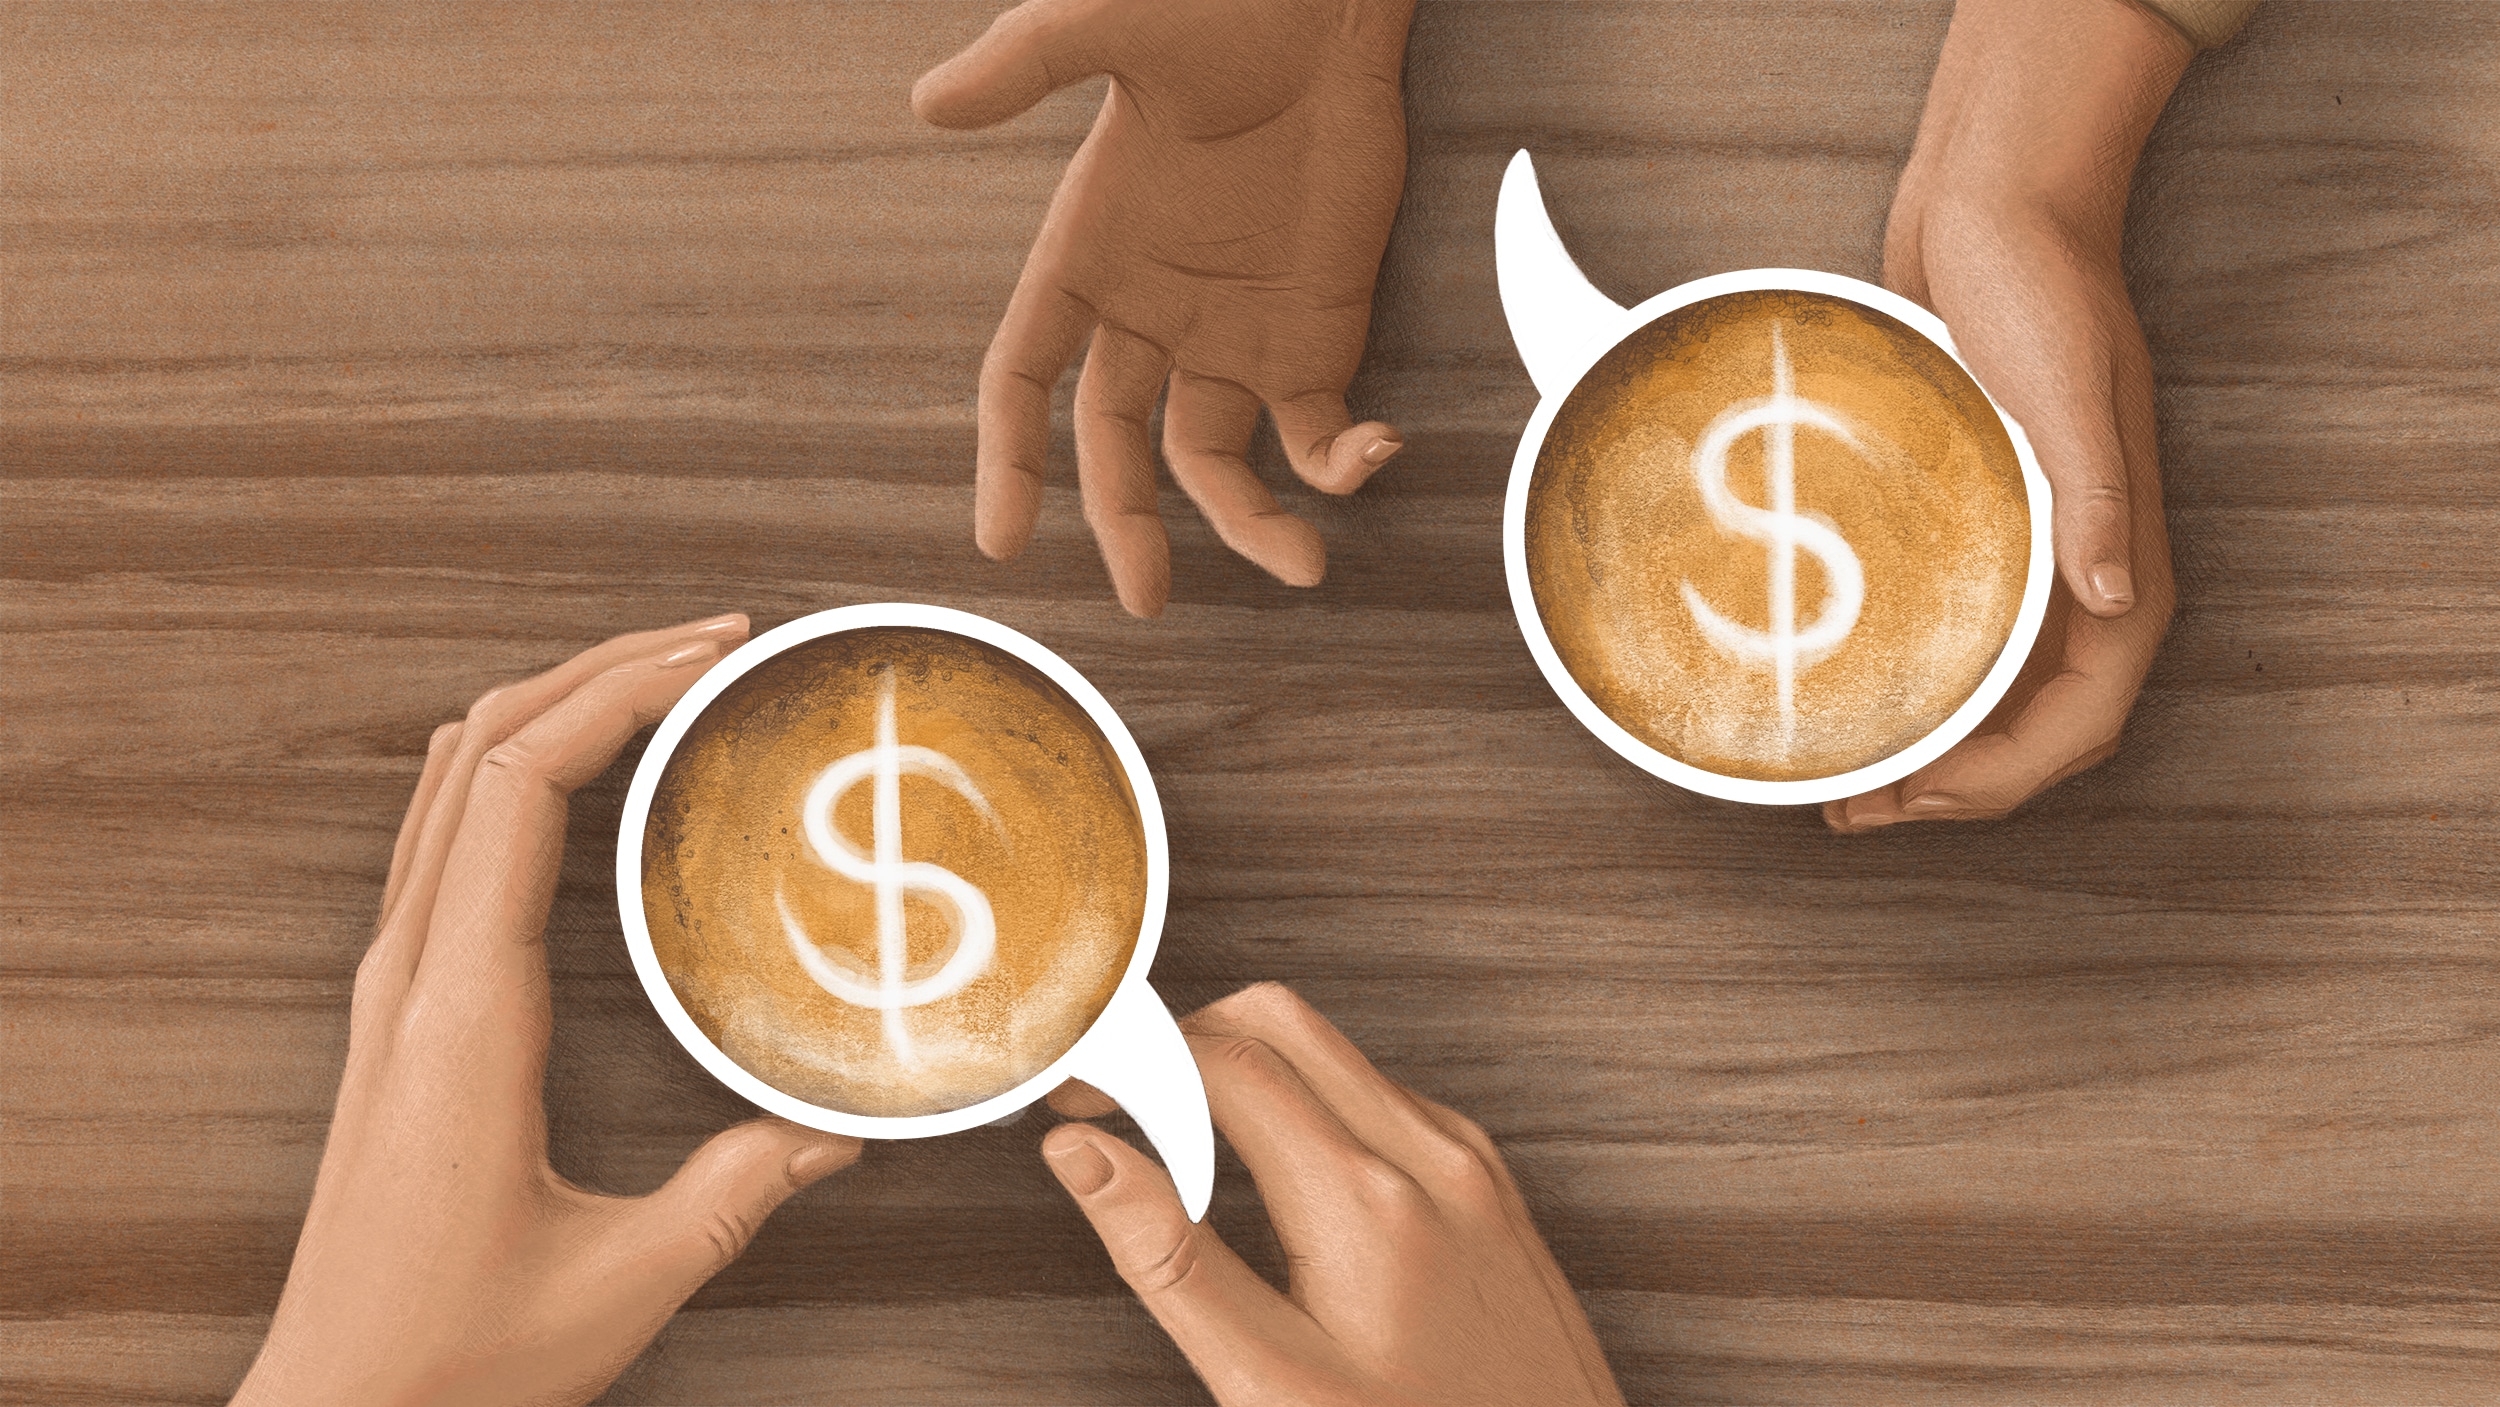 Top-Down view of two pairs of hands holding coffee cups and gesturing as if in conversation. The rims of the coffee cups are shaped like speech bubbles, and the latte art depicts dollar signs.